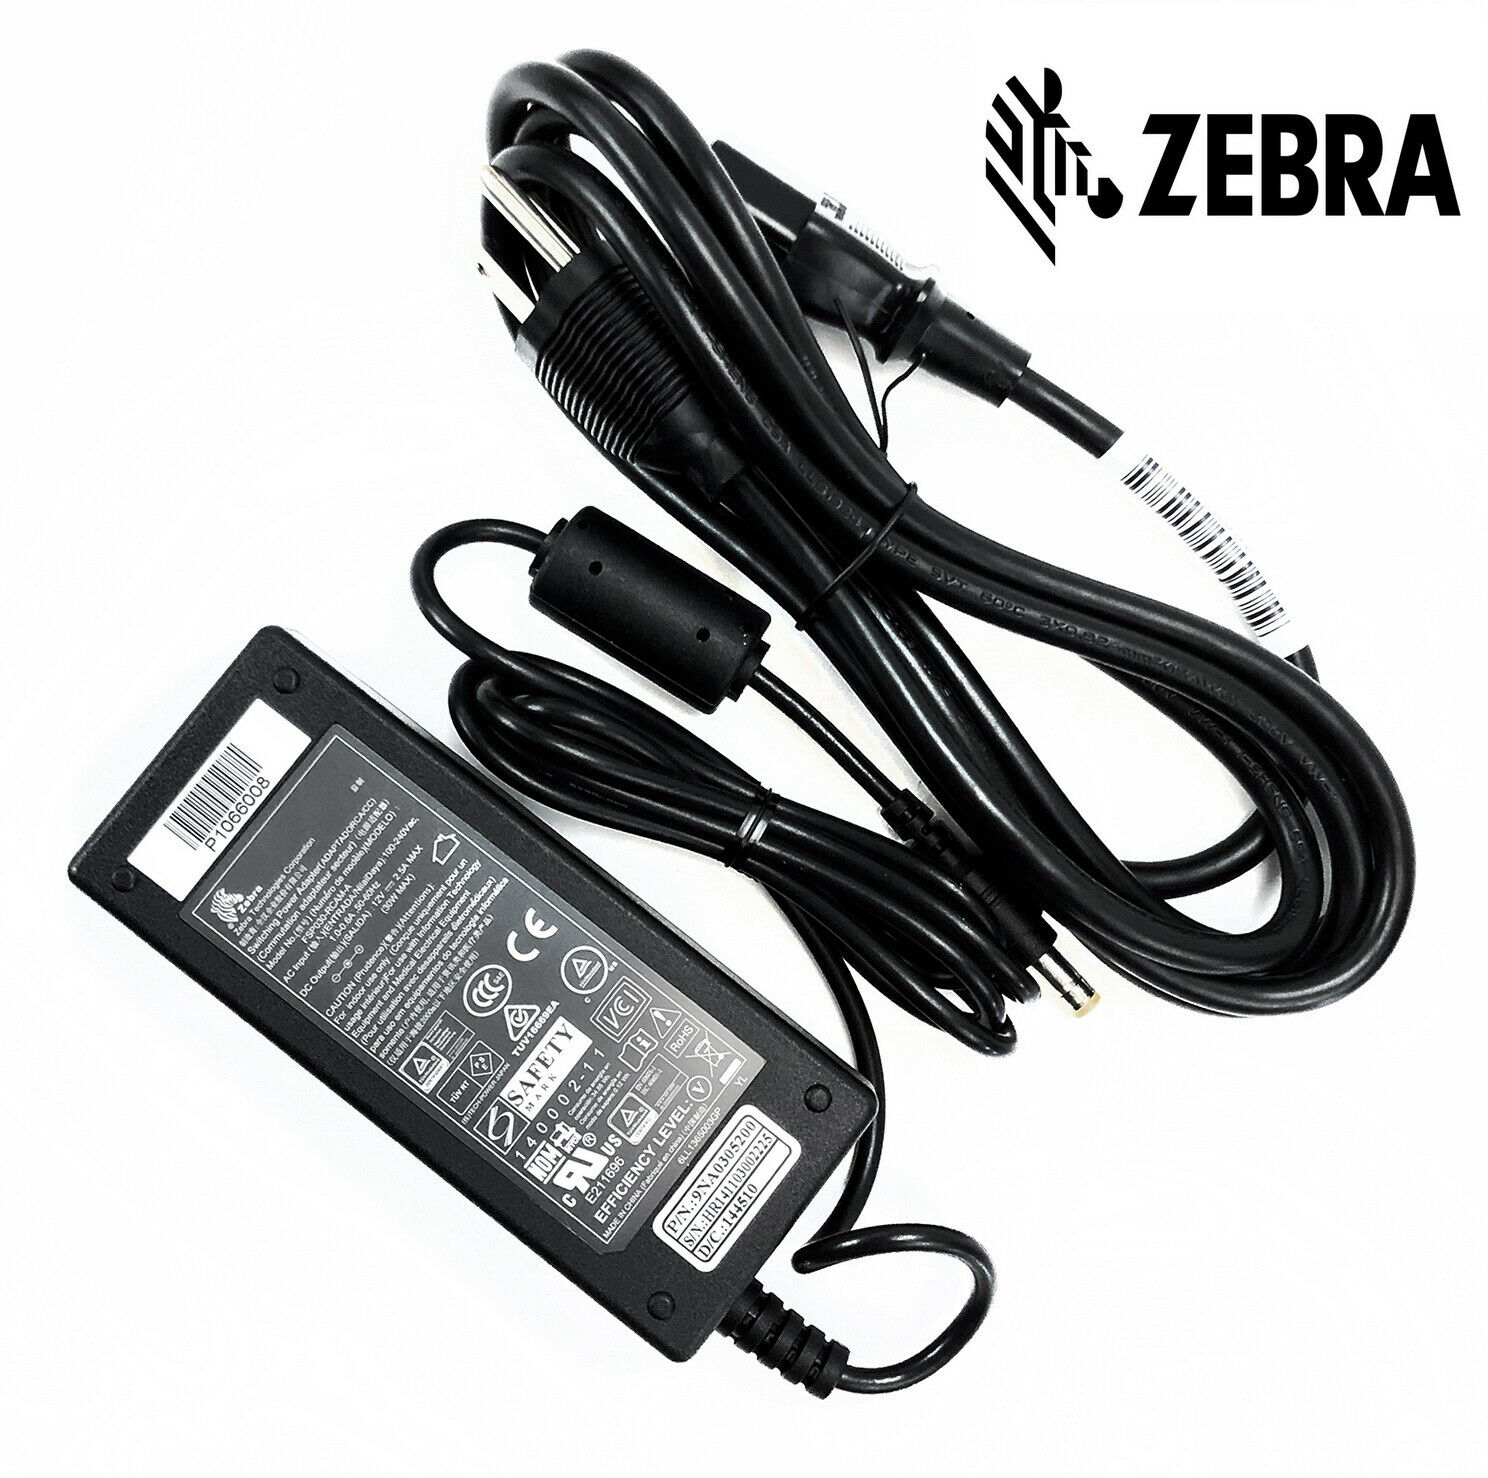 NEW Original AC DC Power Adapter For Zebra QLn220 QLn320 Label Printer w/US Cord Country/Region of Manufacture: Japan